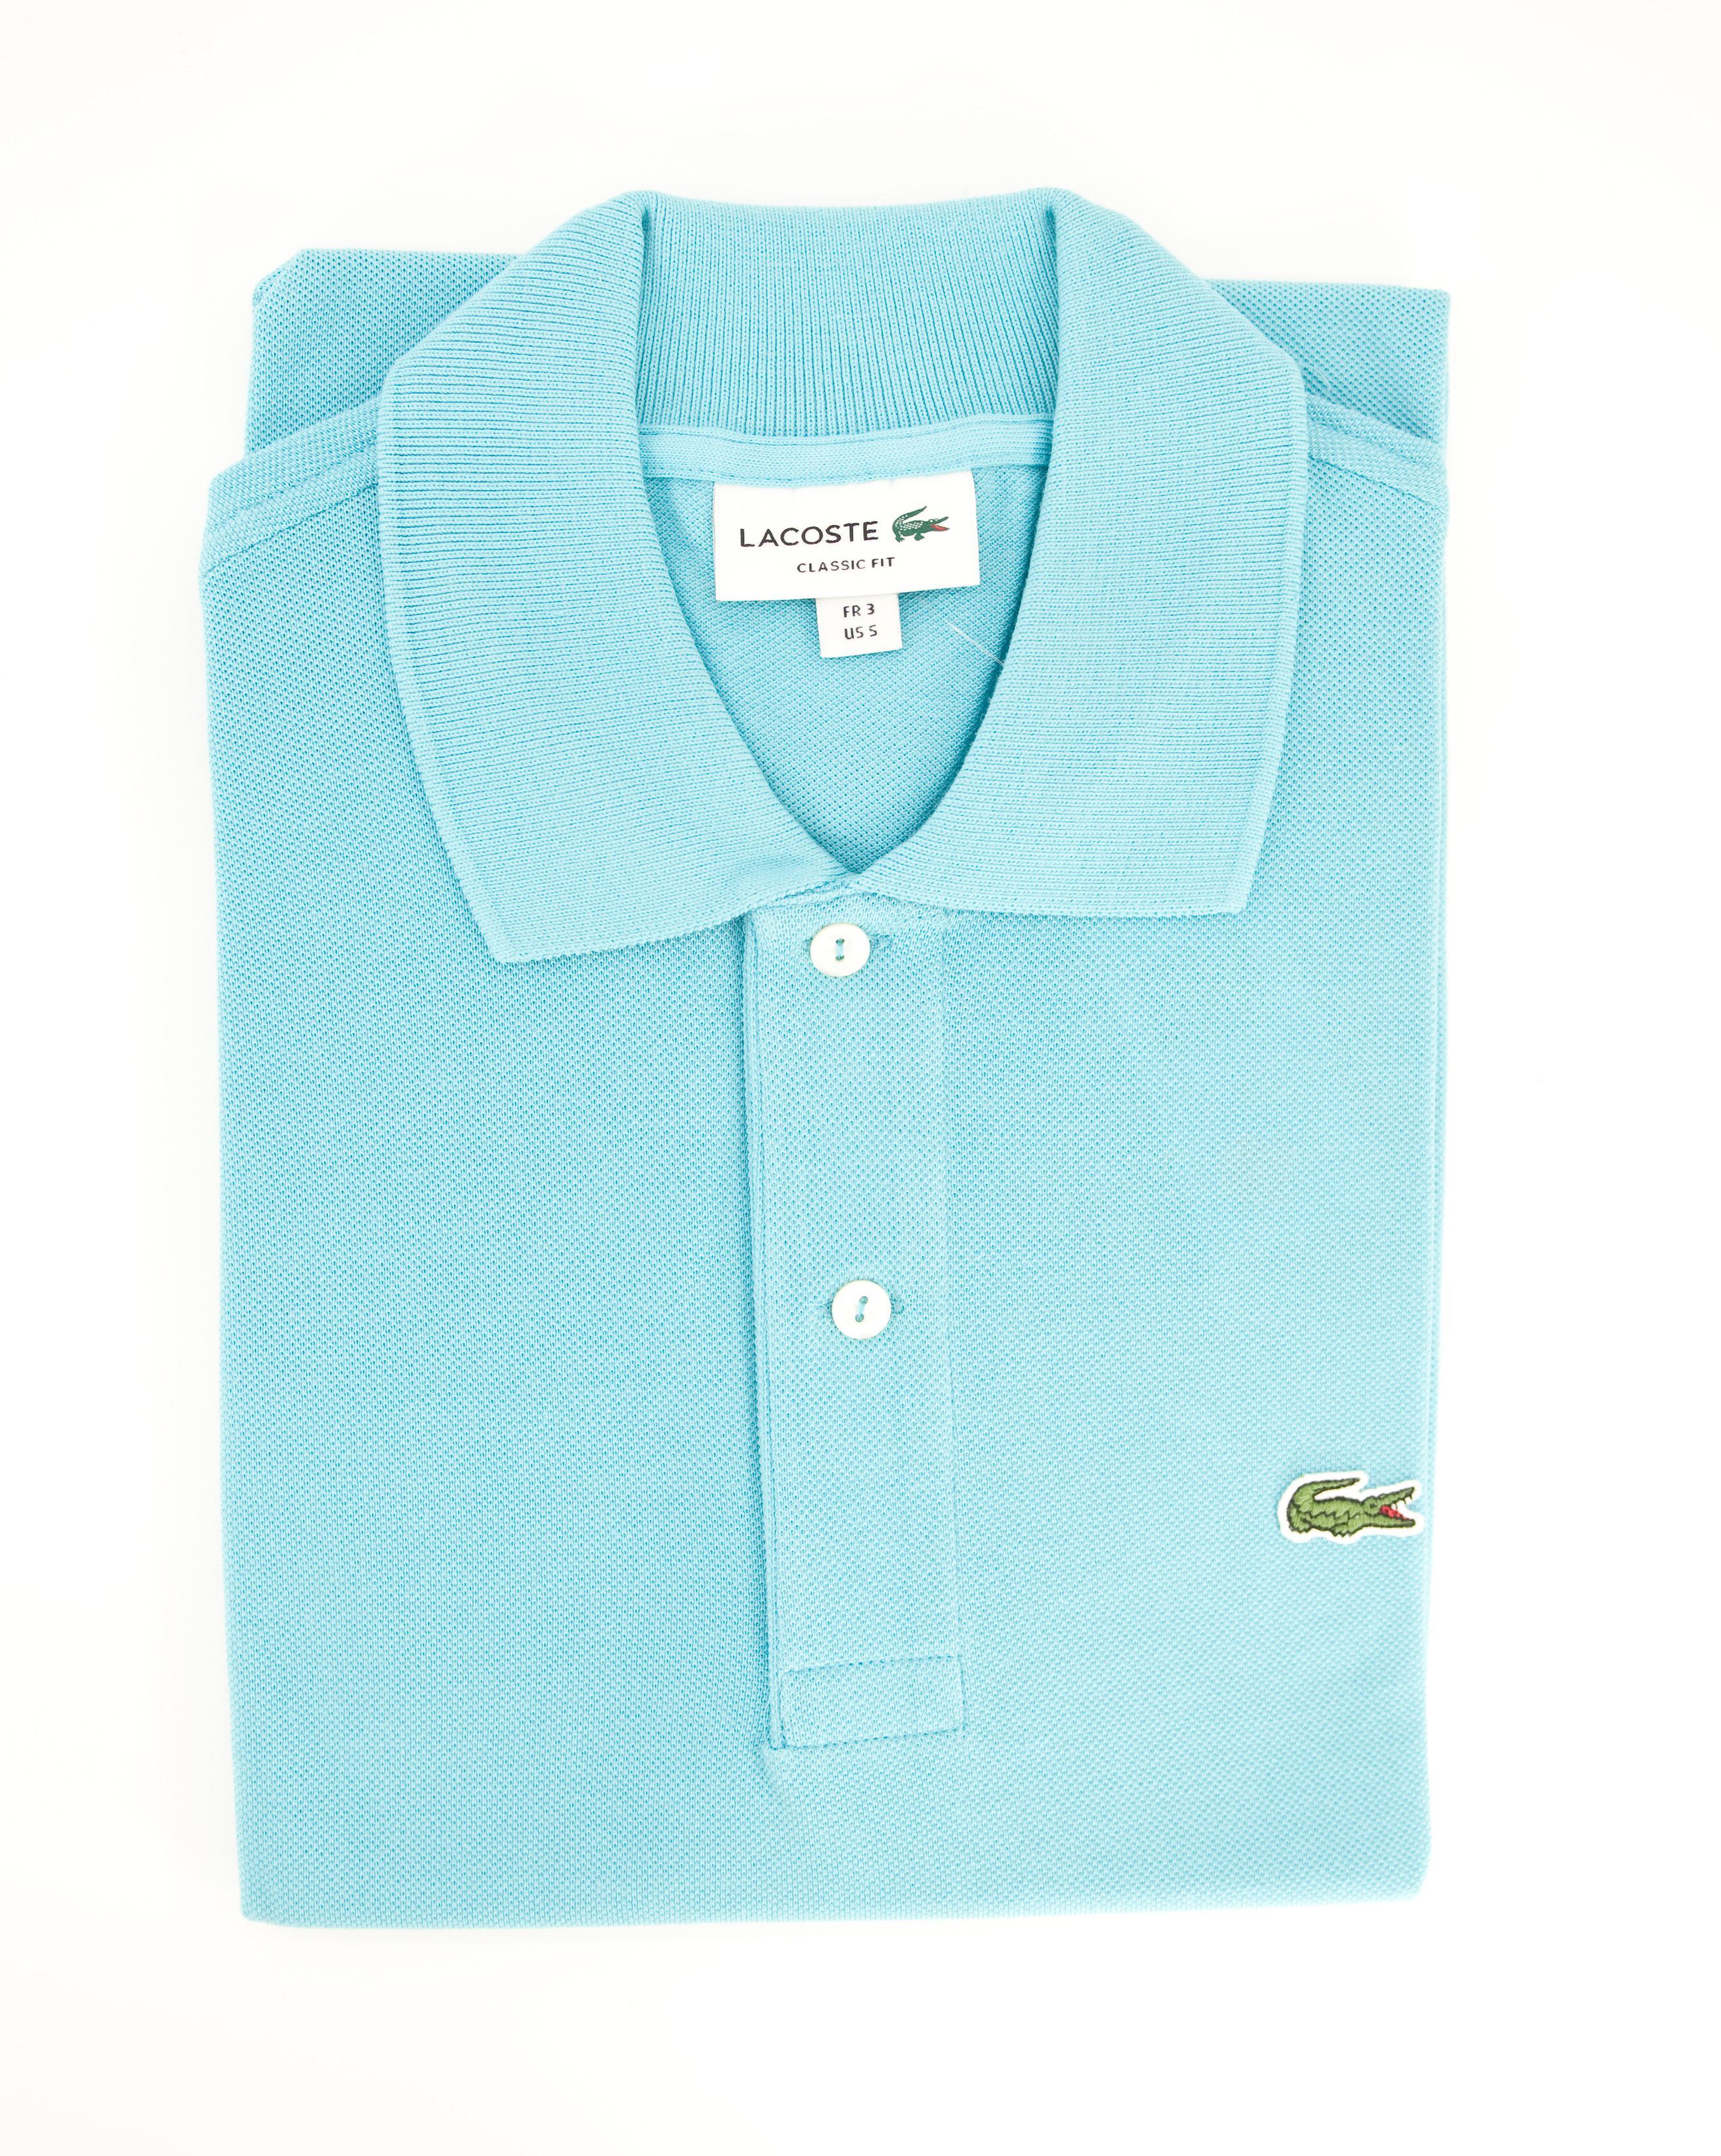 lacoste polo turquoise